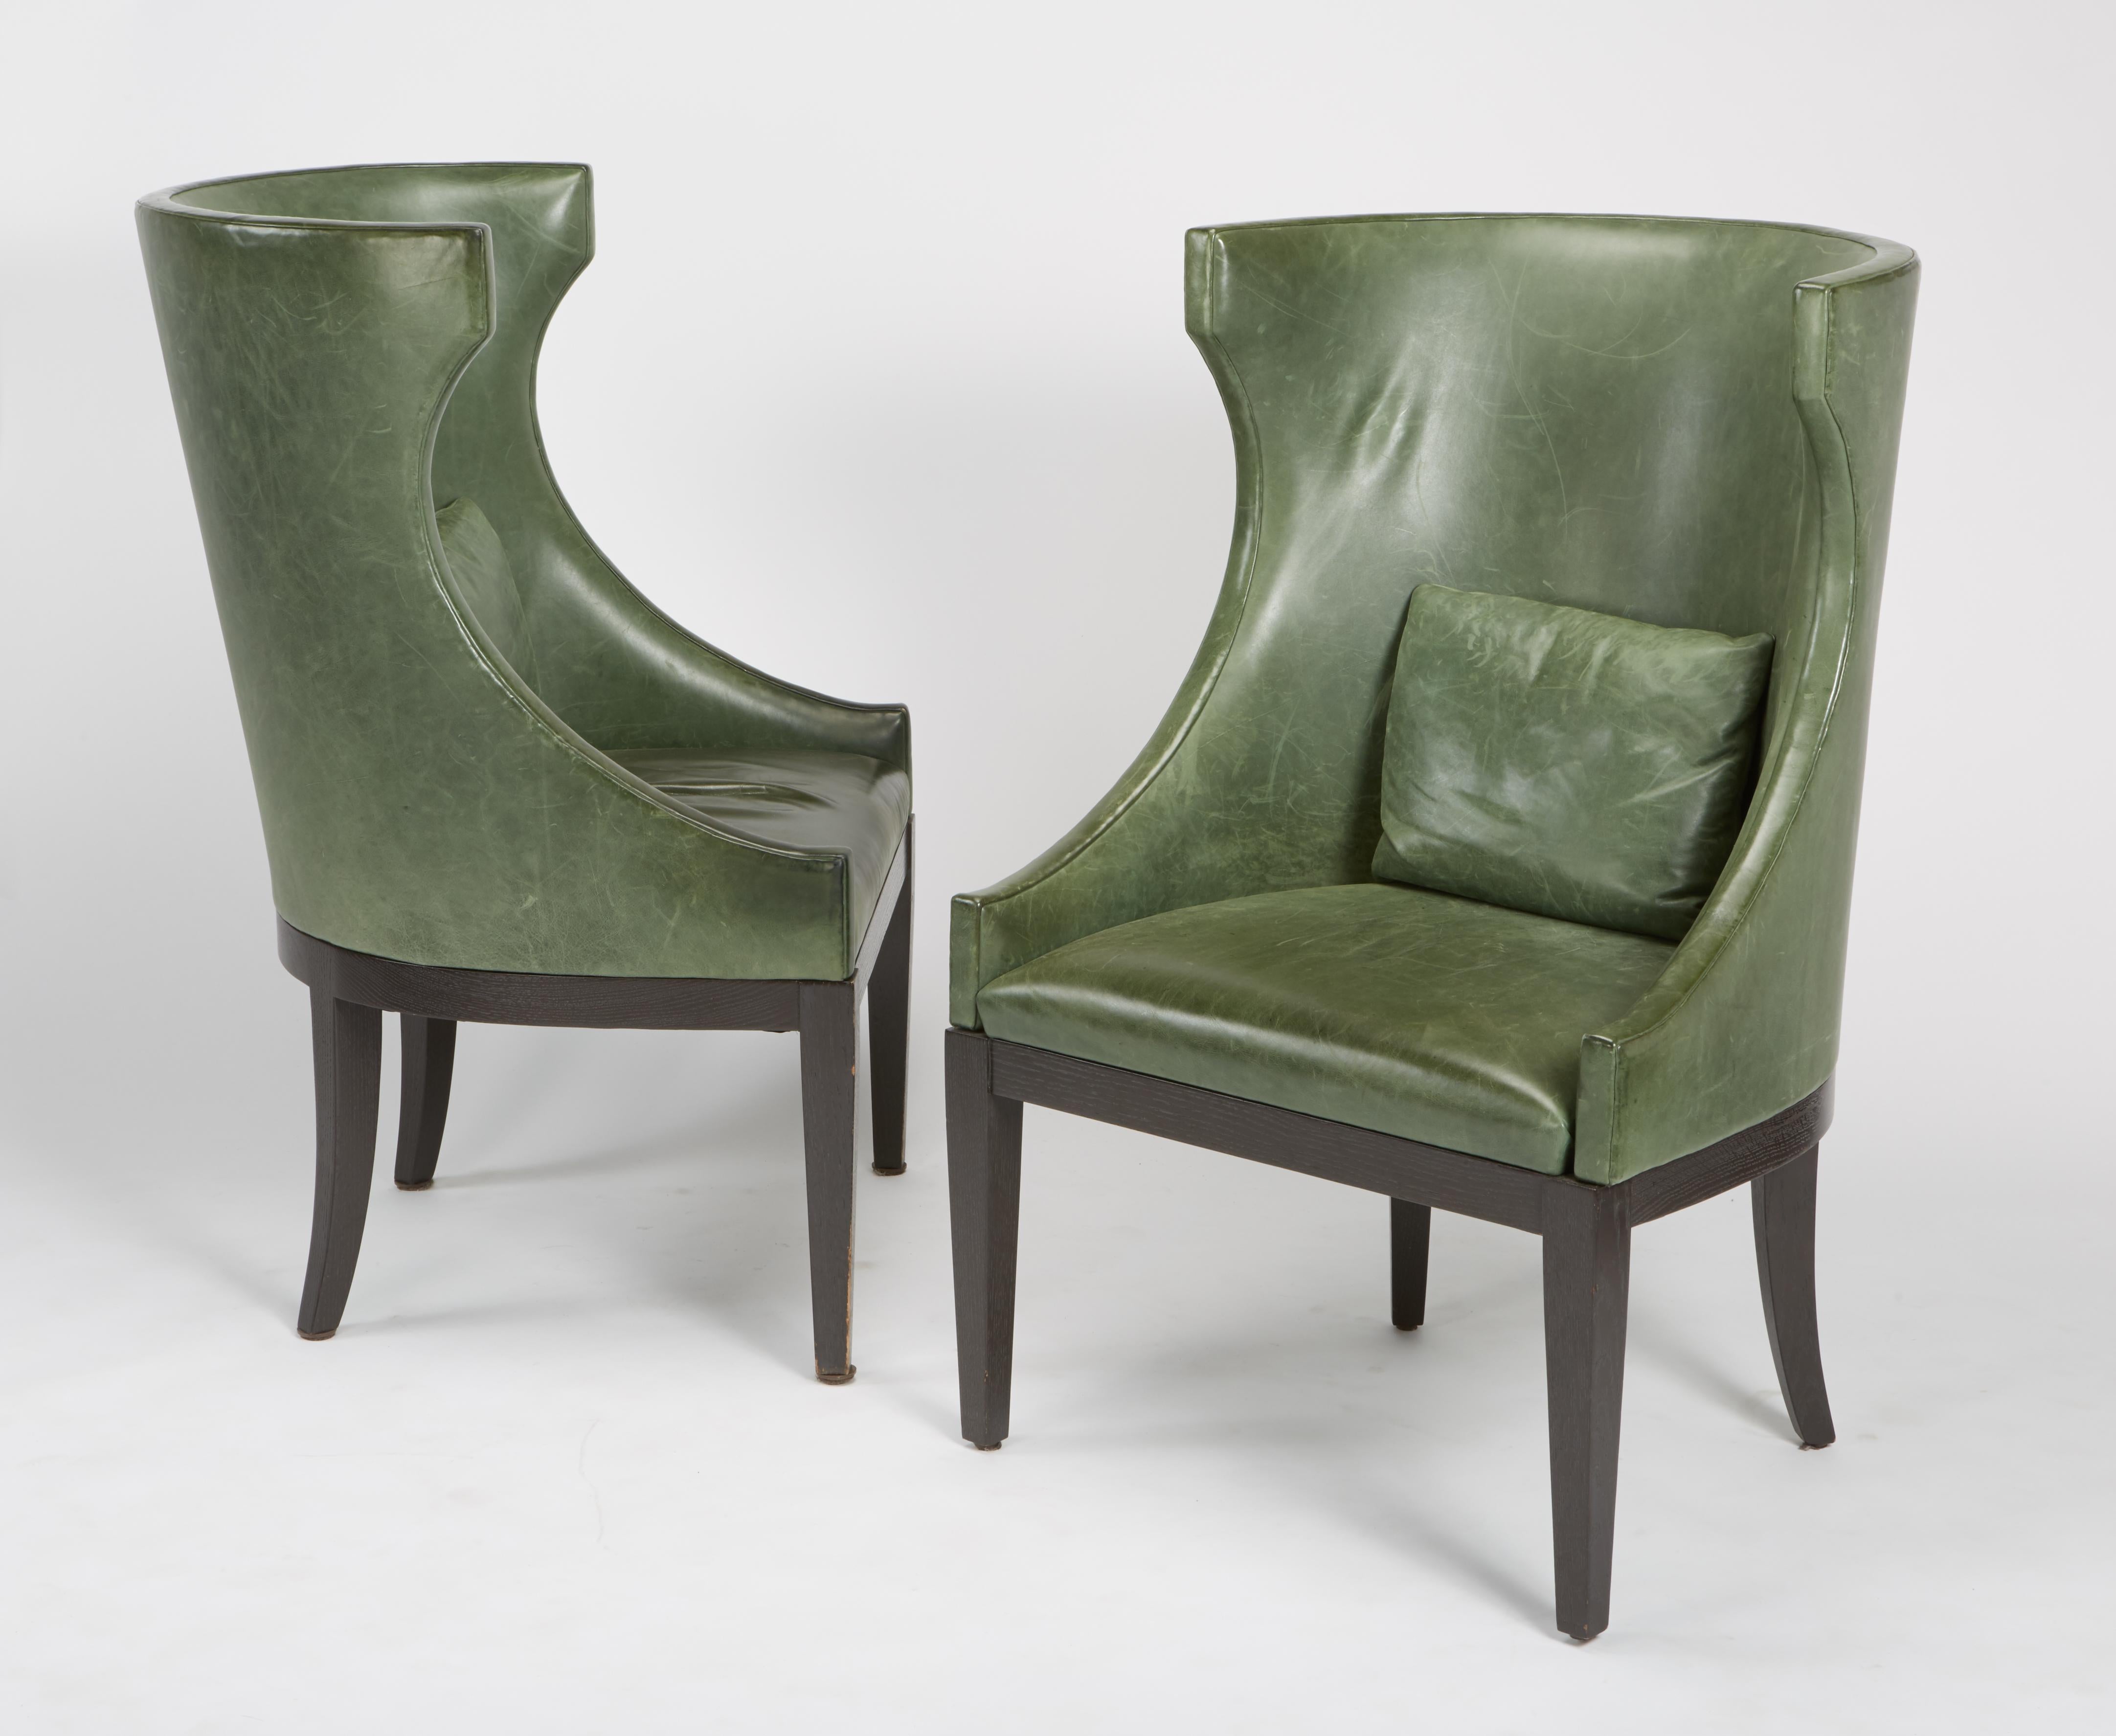 Finely crafted pair of high wing back club chairs by Dessin Fournir with classical modern form, having distressed leather from Garrett Leather with back cushions on ebony stained frame and legs, circa 2004. Leather shows wear and age. Legs may have